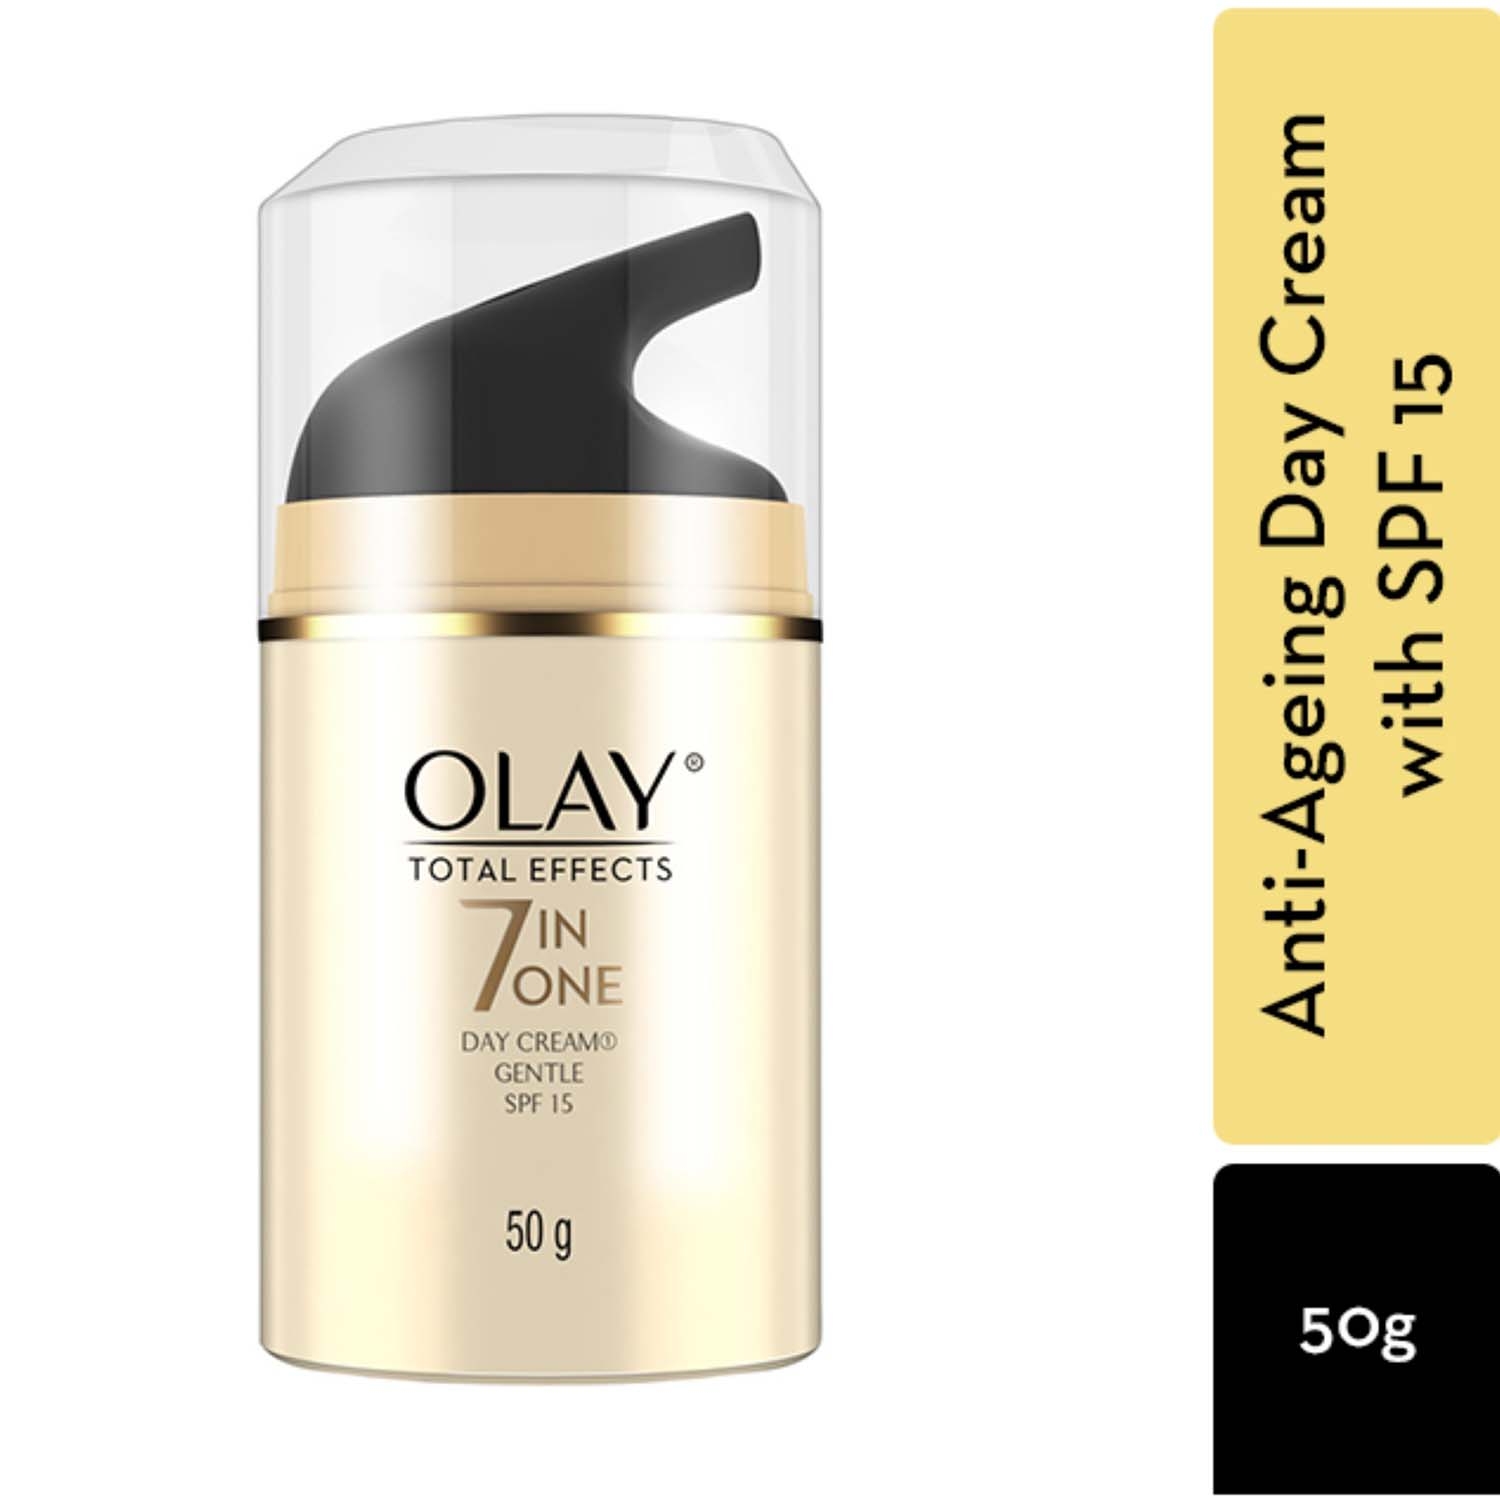 Olay | Olay 7-In-1 Total Effects Anti Ageing Gentle Day Cream SPF 15 (50g)